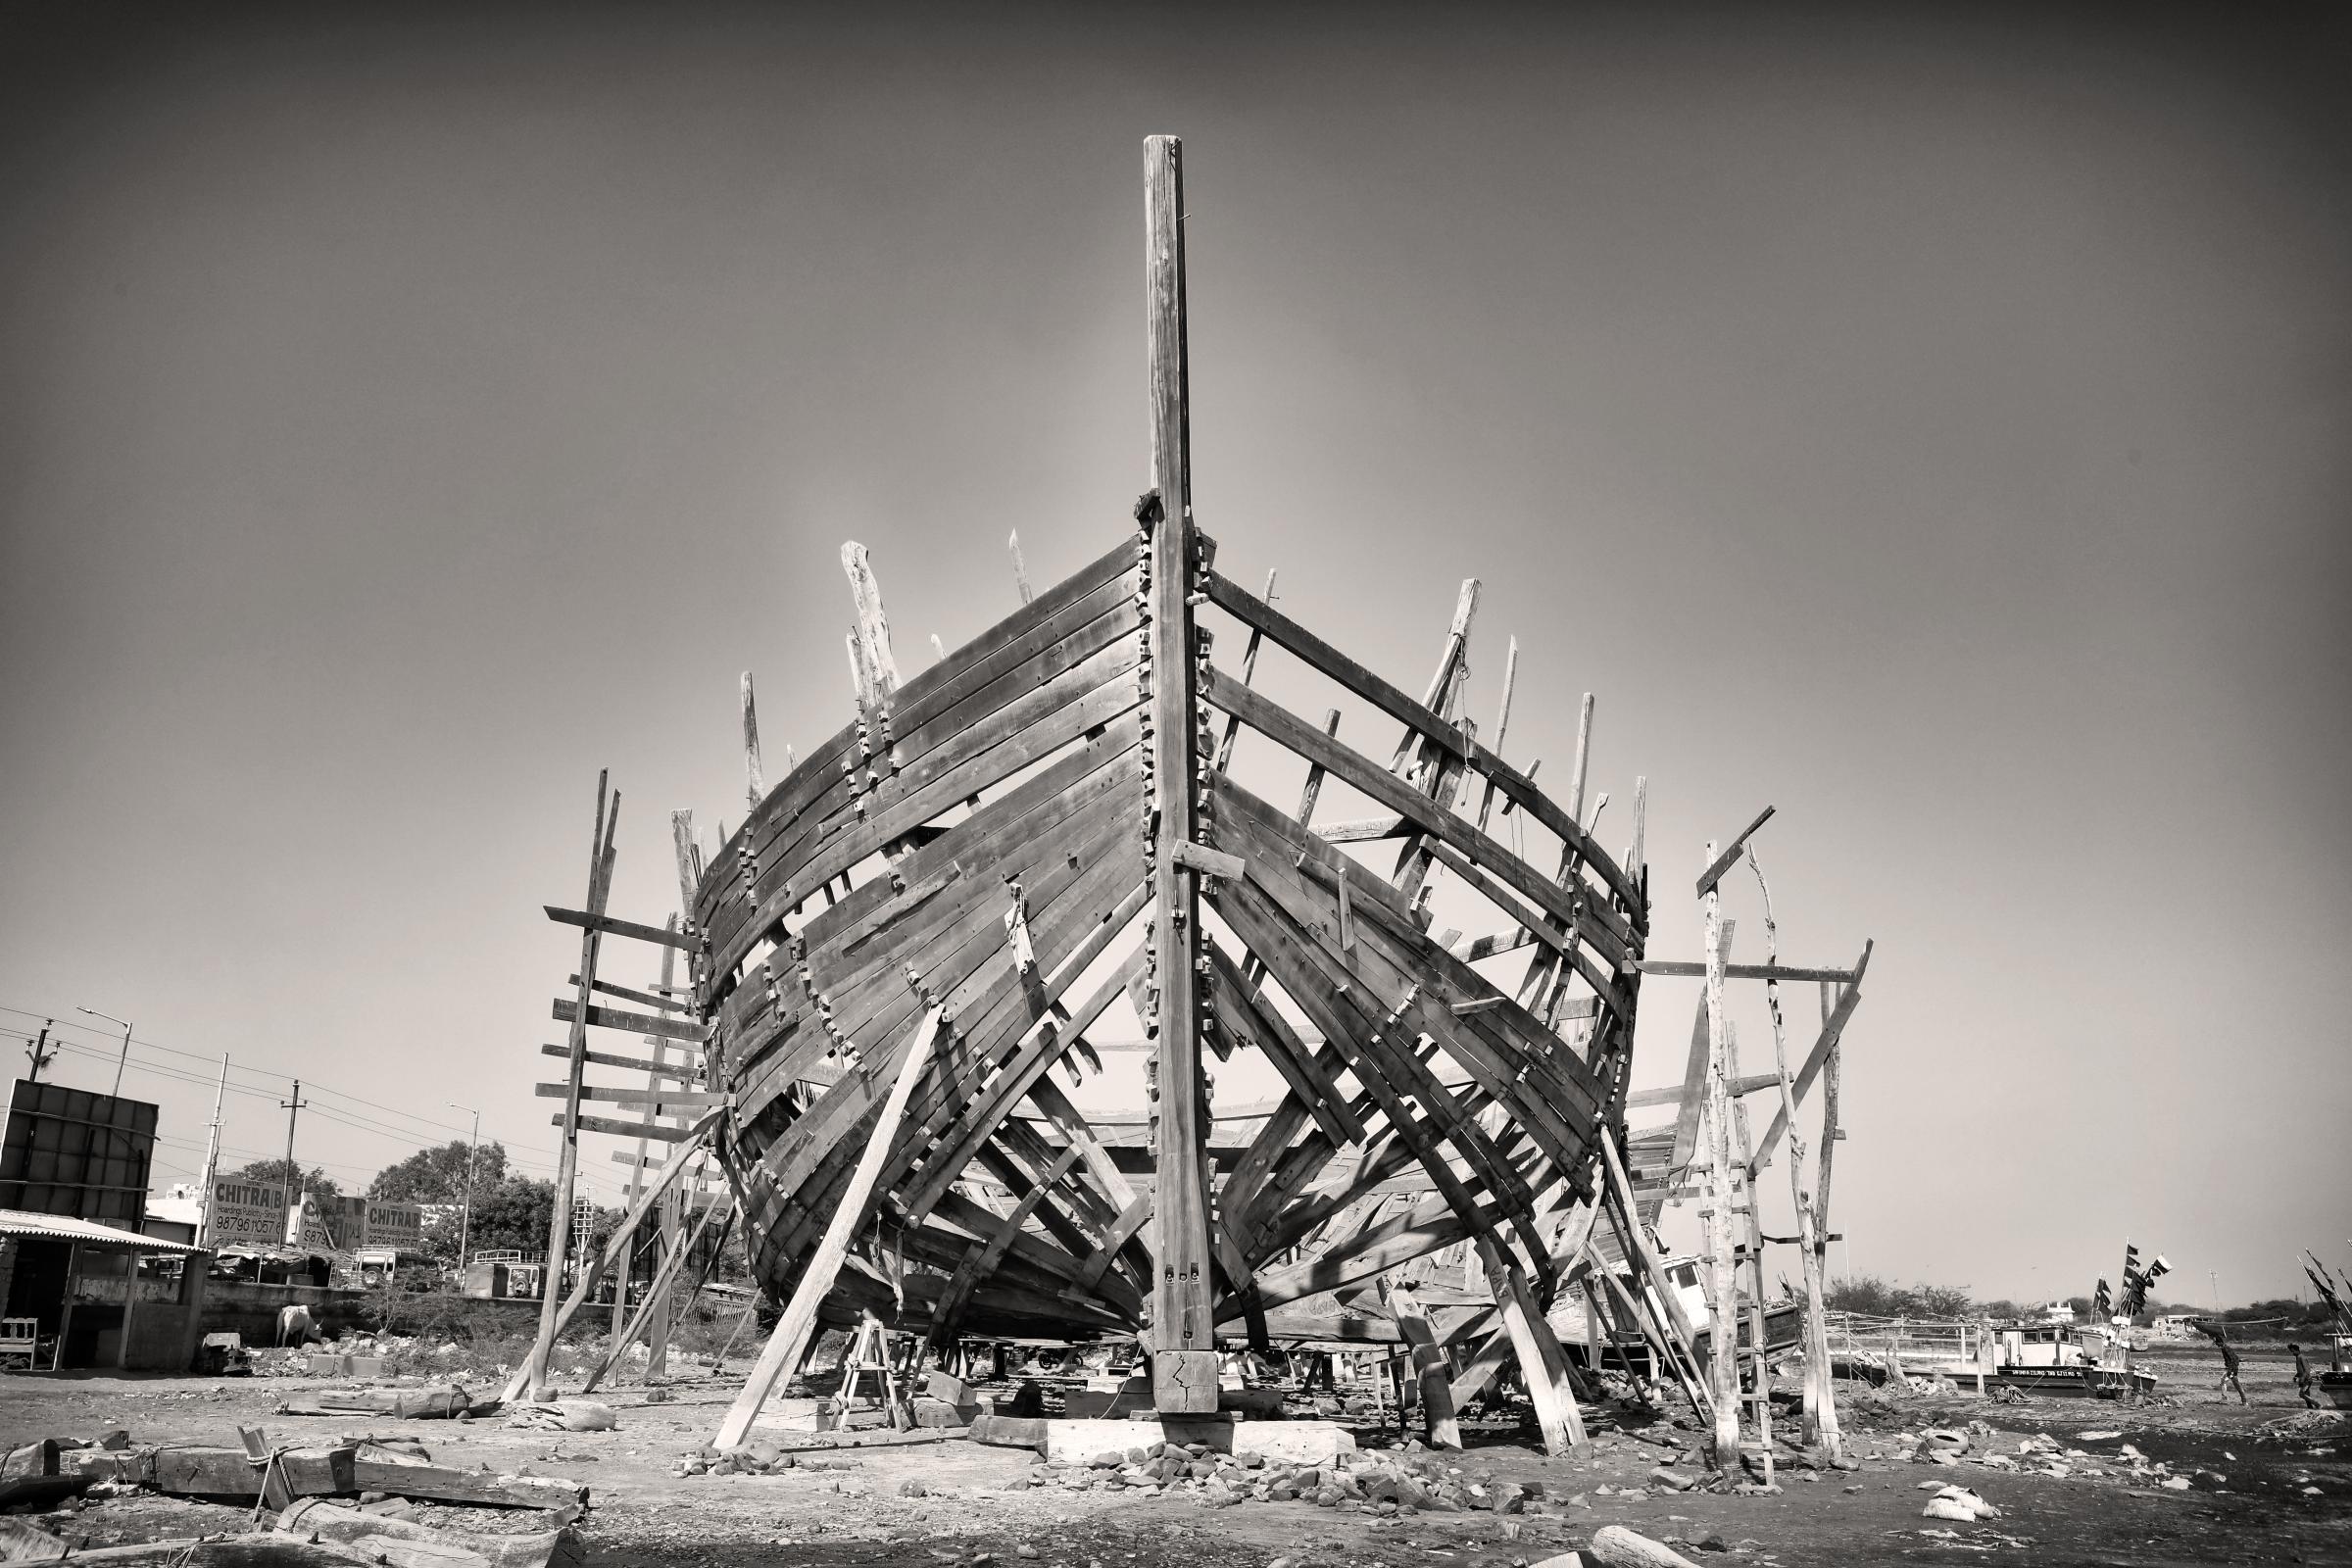 the last dhows : Ship builder of the sea of Oman - FEBRUARY 1RST, 2019, MANDVI, GUJARAT, INDIA : (Photo by...